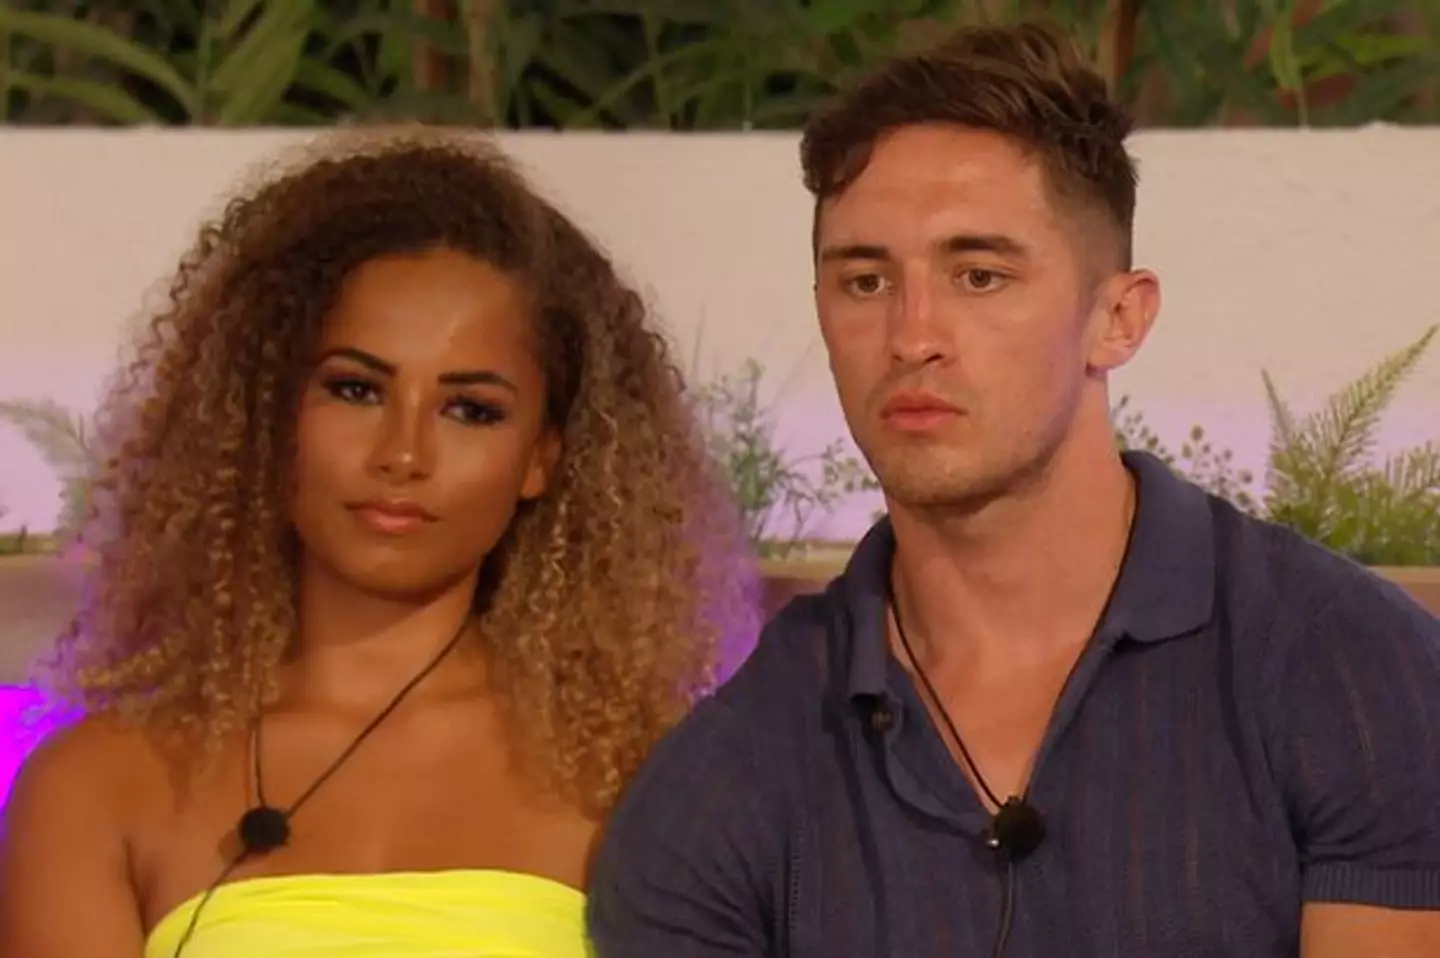 Amber won Love Island with her then-boyfriend, rugby player Greg O'Shea.